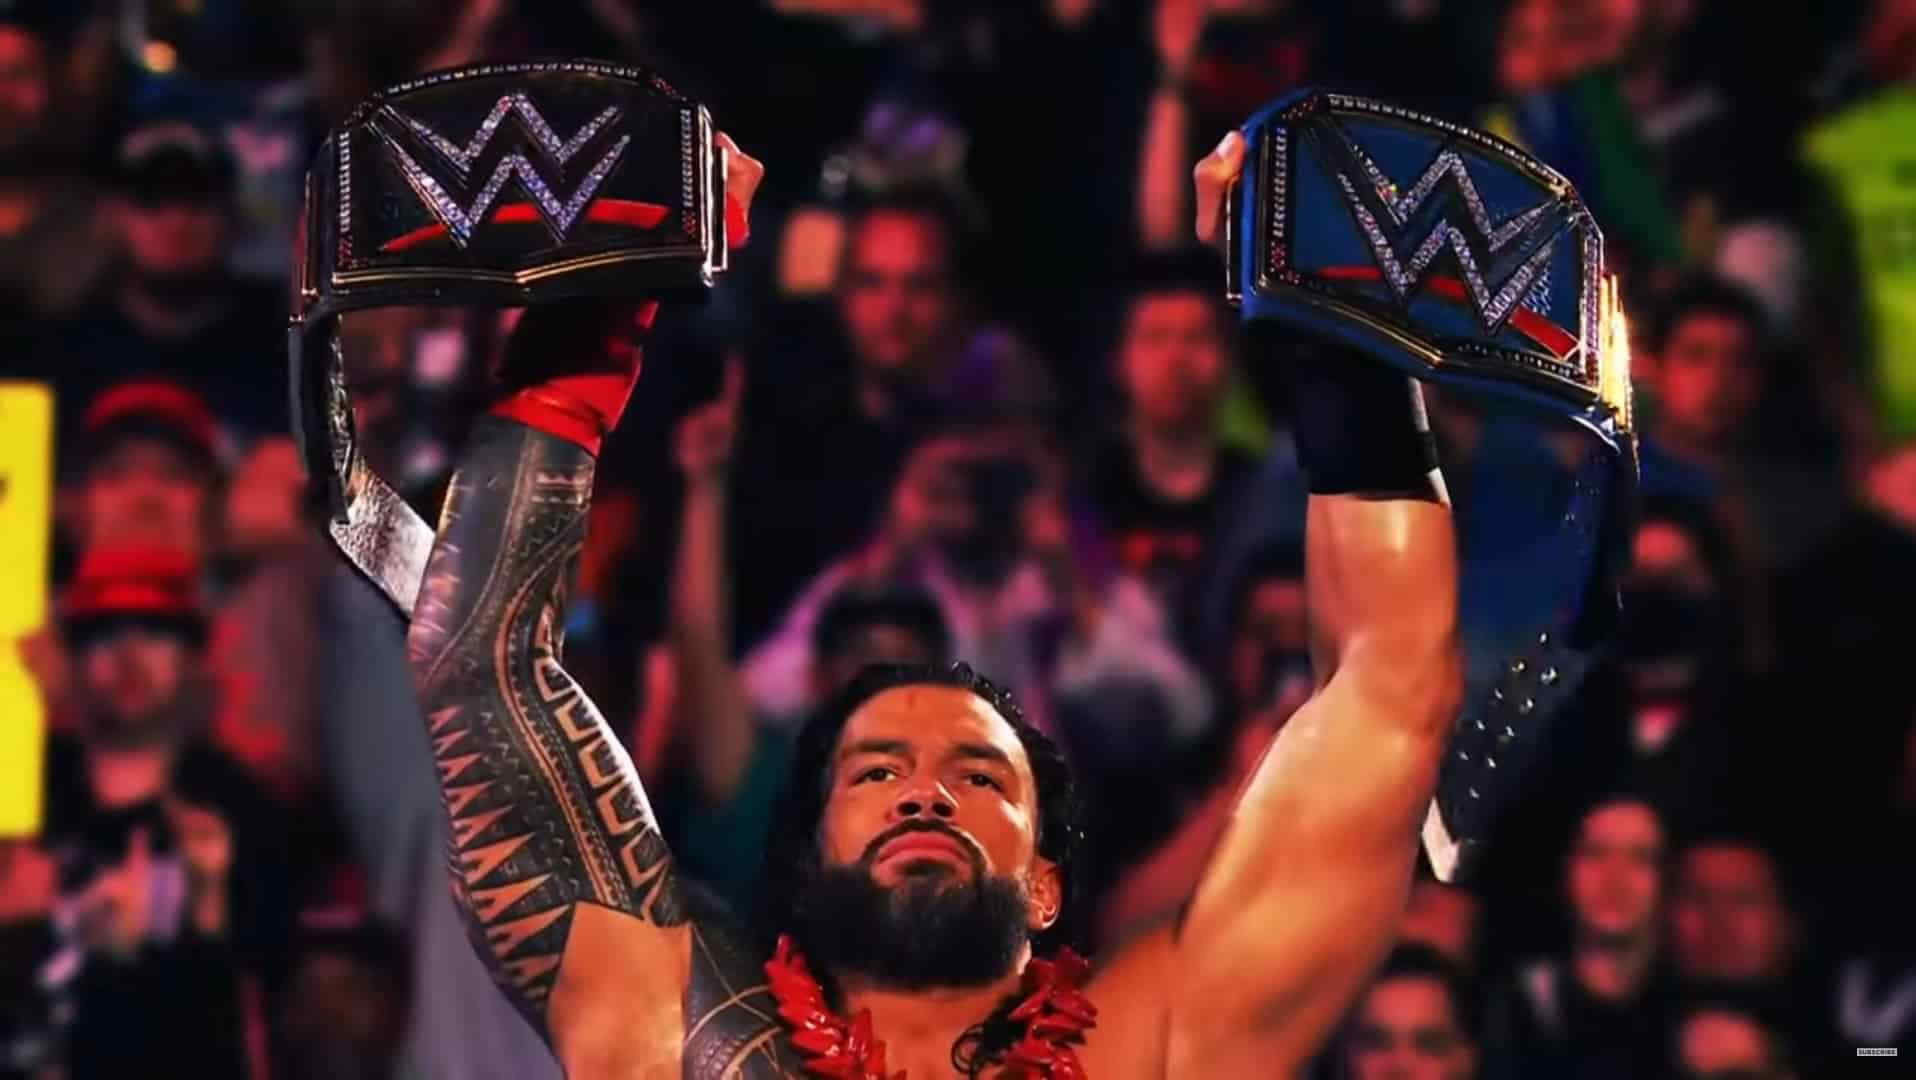 Roman Reigns to introduce a new WWE Universal Championship belt